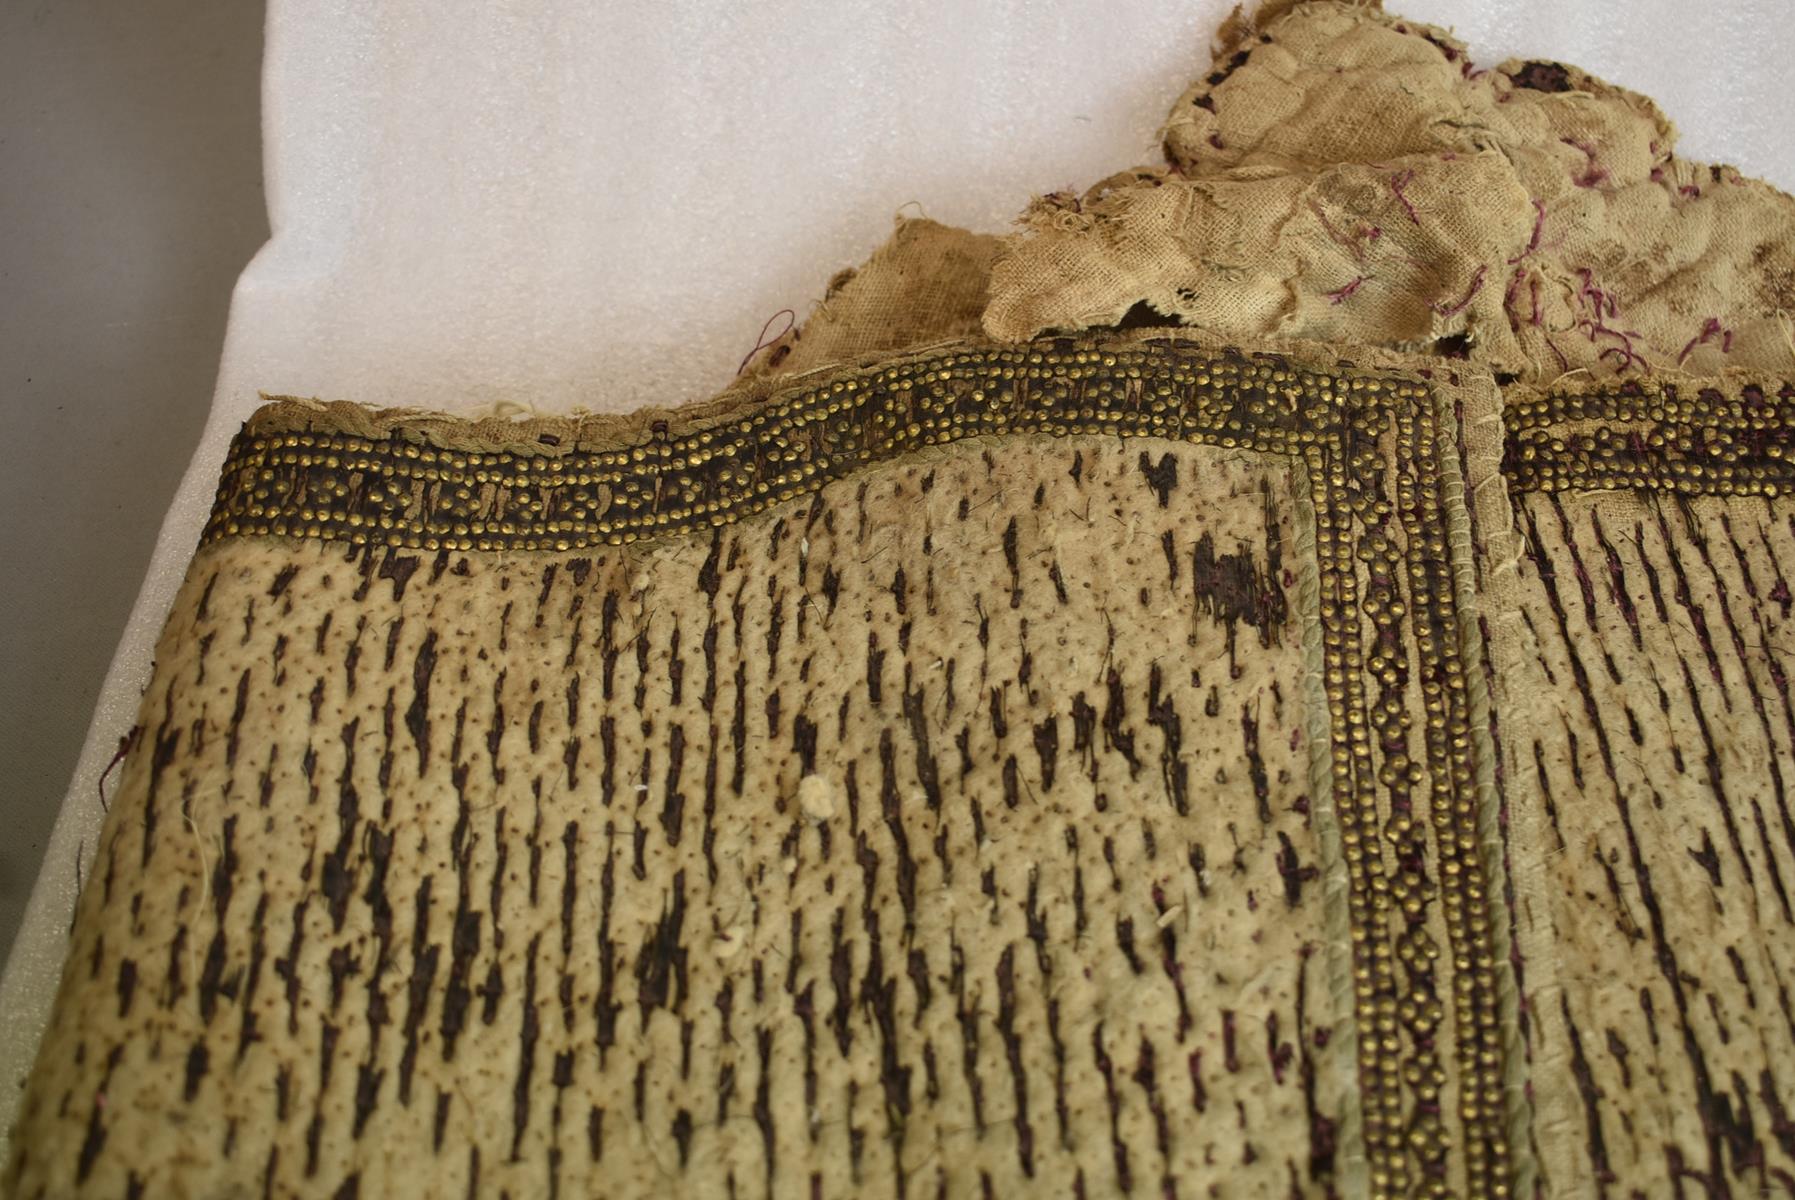 A VERY RARE 19TH CENTURY INDIAN RAJPUT FABRIC BODY ARMOUR, of characteristic cummerbund form, the - Image 7 of 15